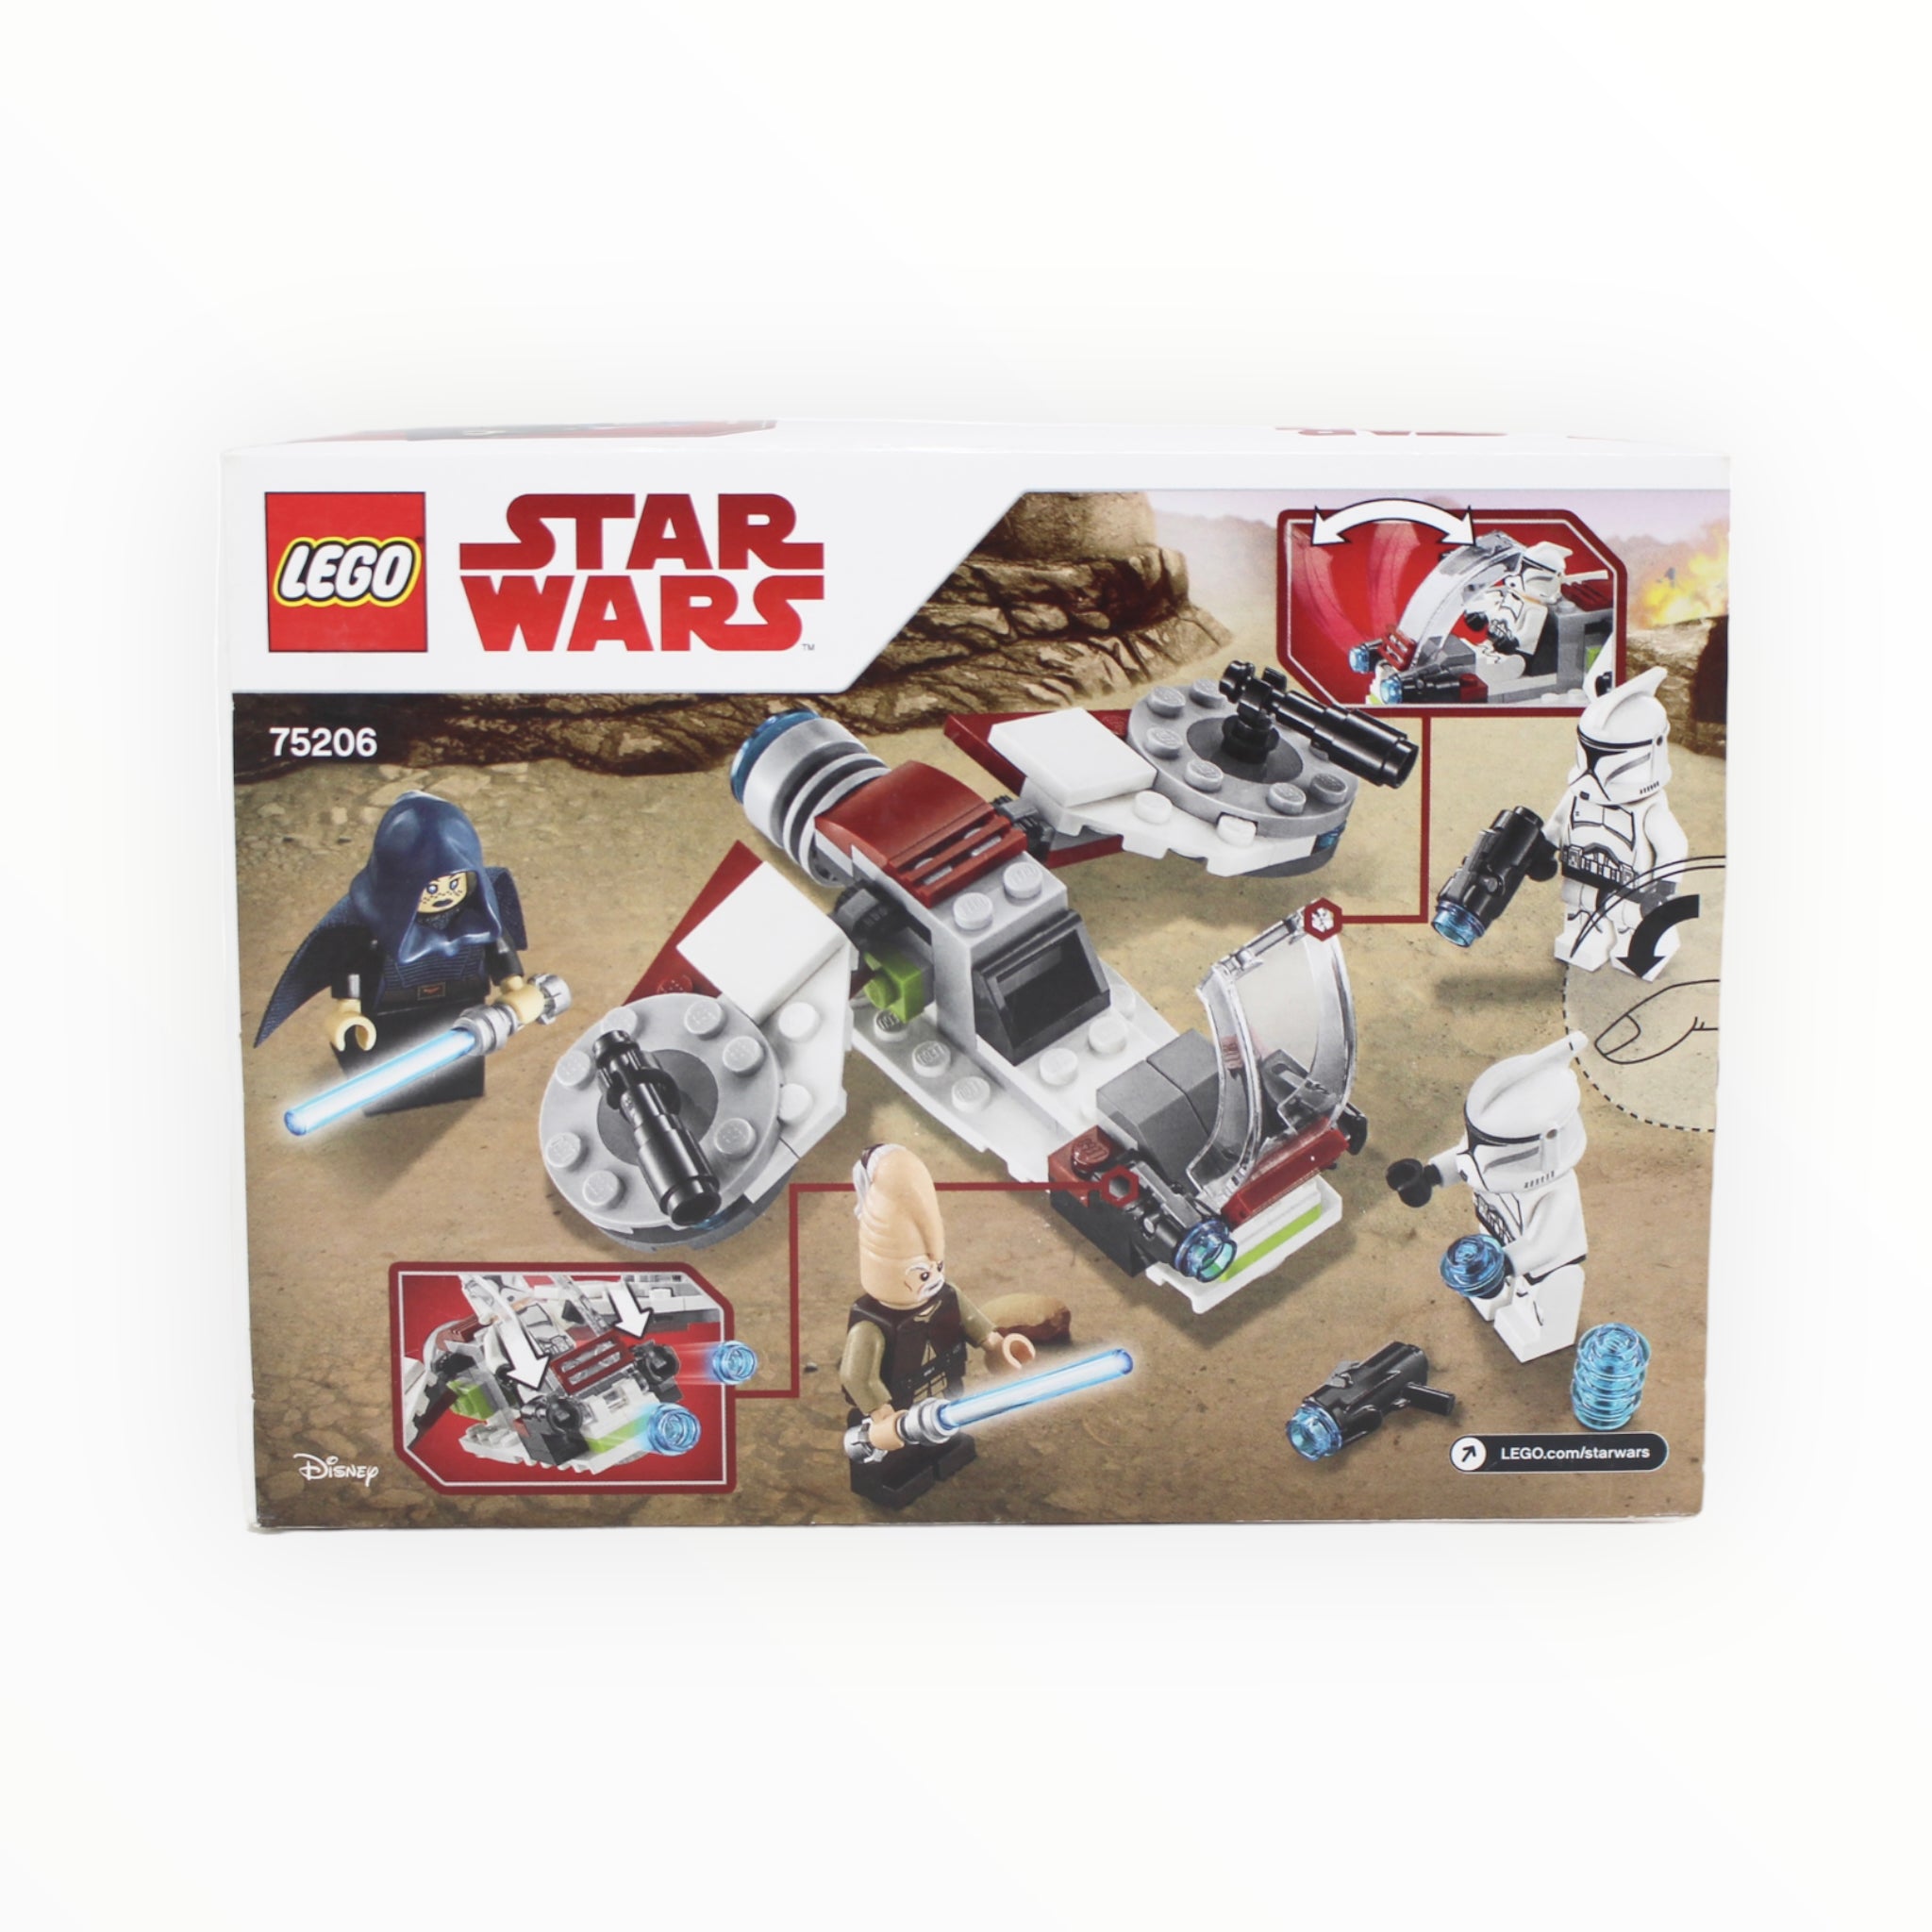 Retired Set 75206 Star Wars Jedi and Clone Troopers Battle Pack